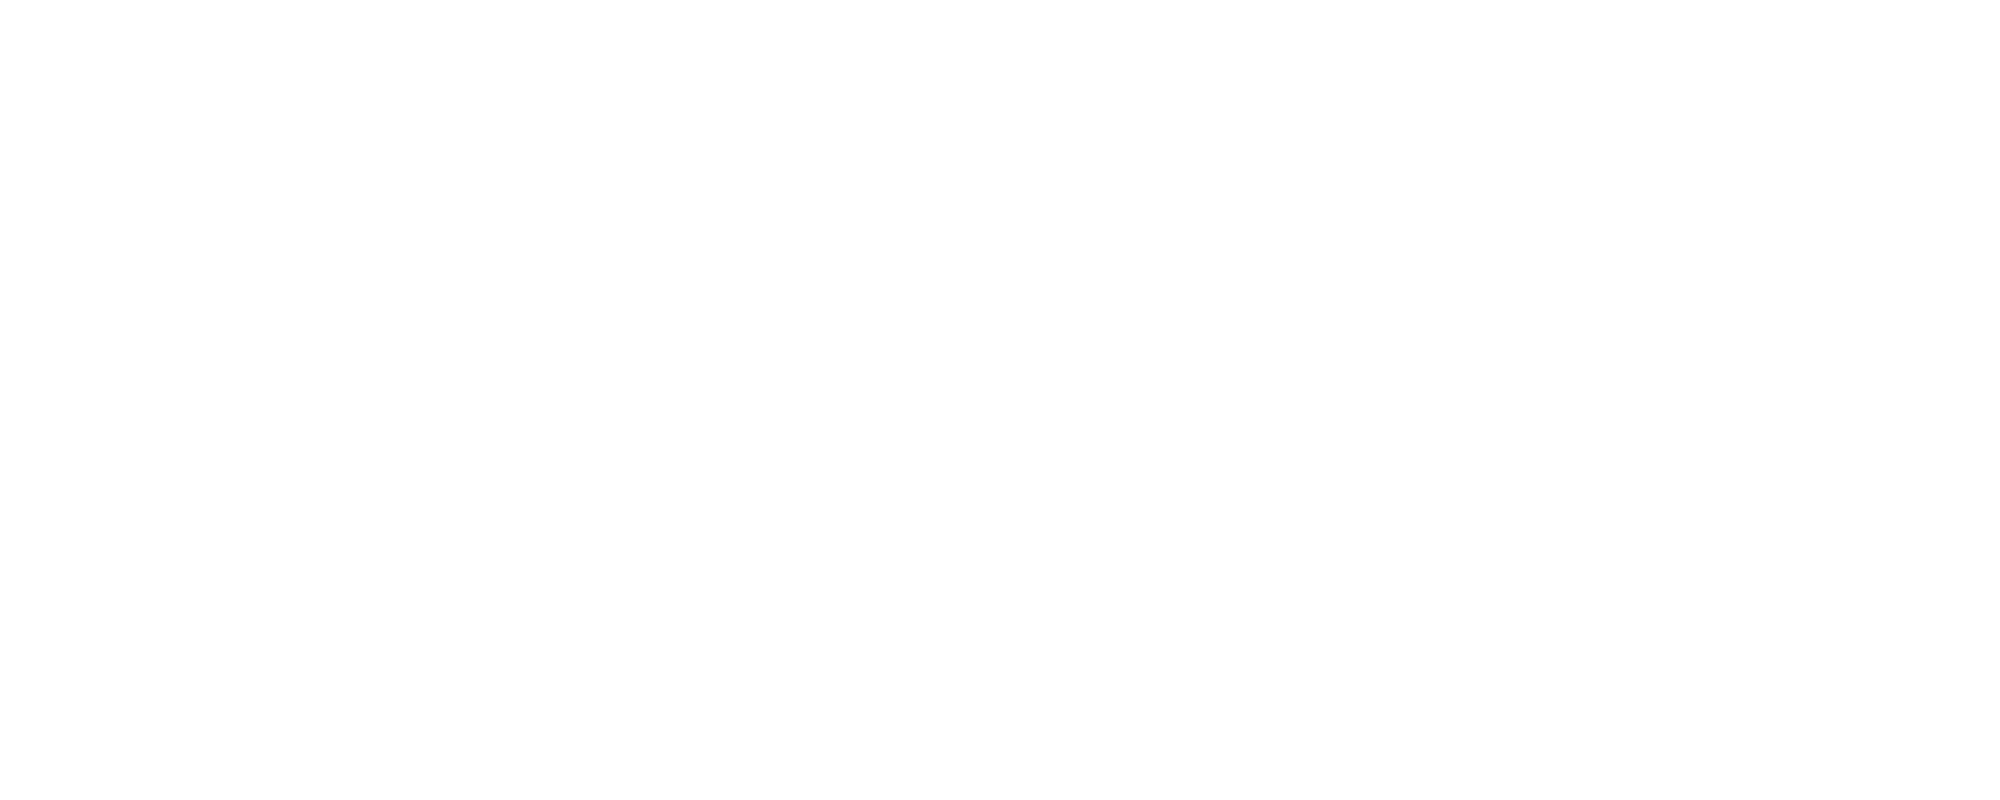 OVATION TV’S STATEMENT ON THE BIDEN ADMINISTRATION’S PROPOSED NEA BUDGET